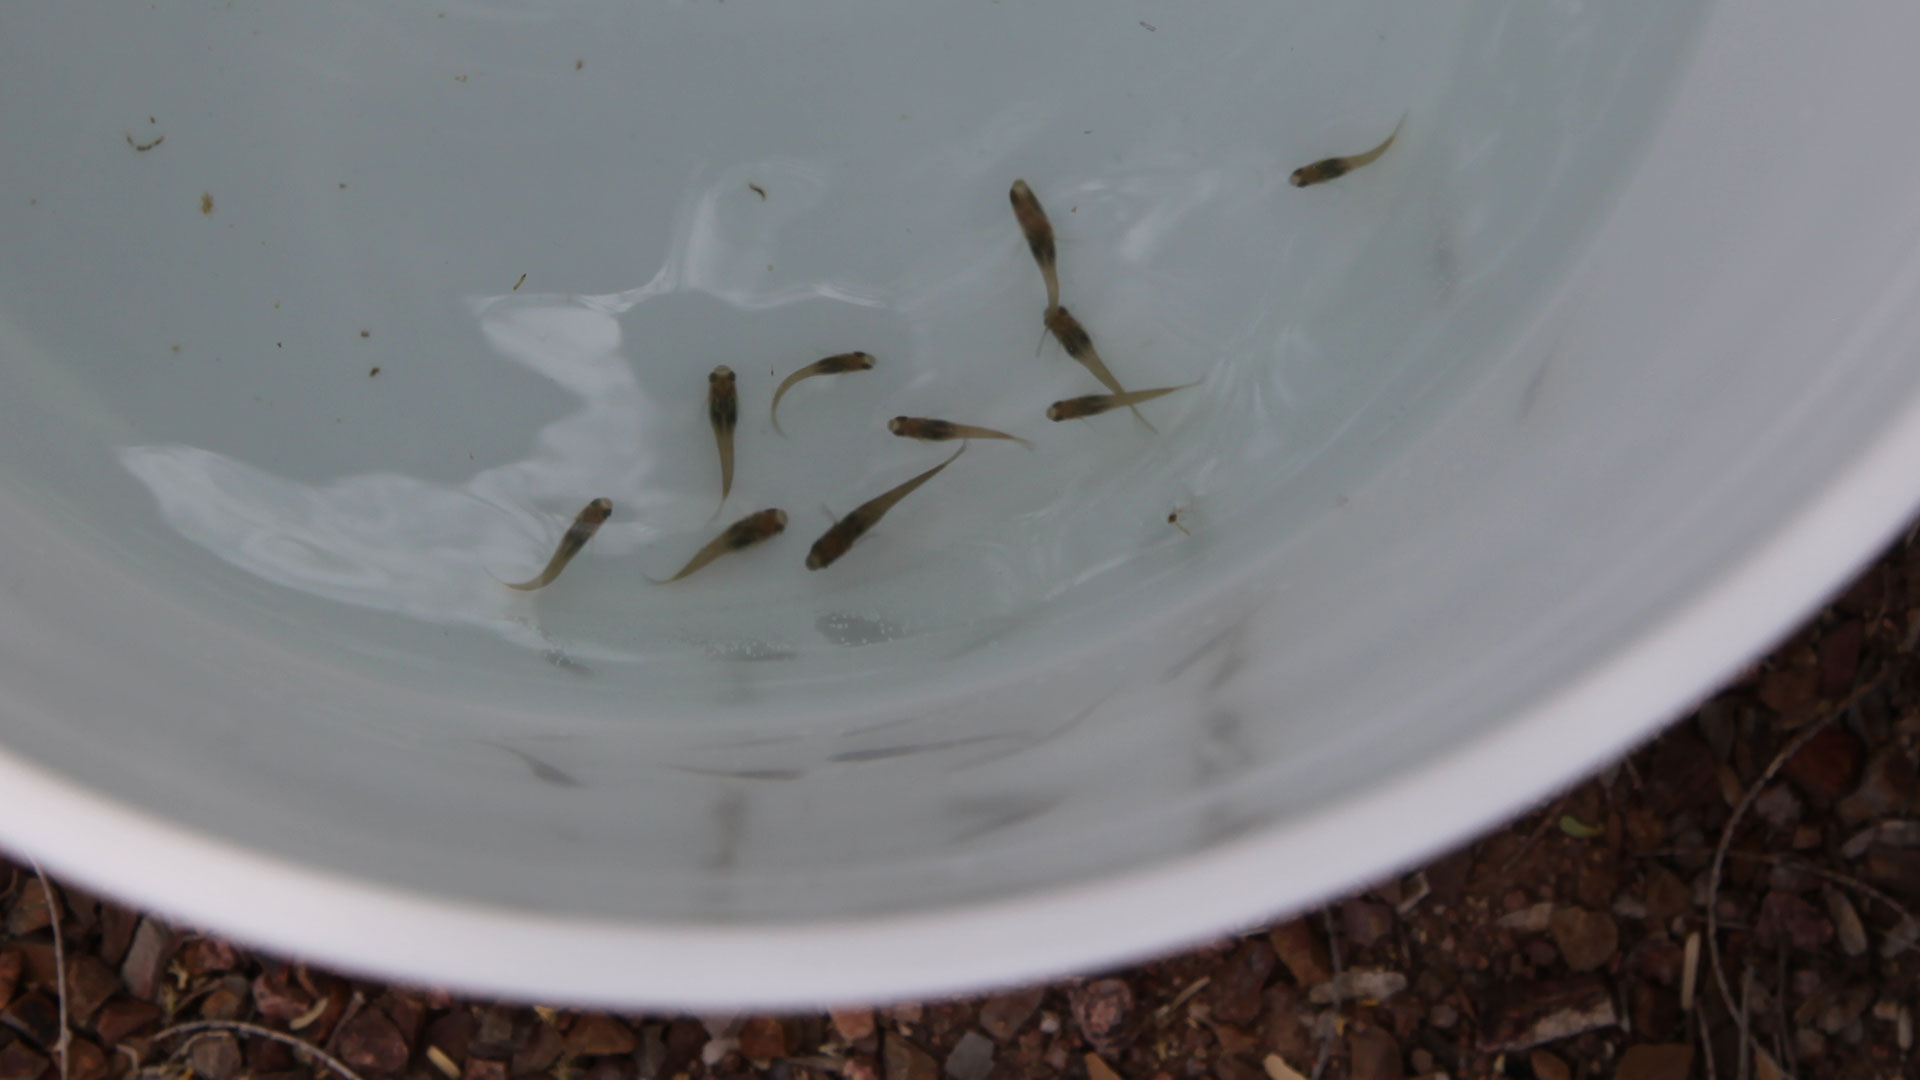 Planting Fish to Kill Mosquitoes: 'This Is Historical' - AZPM